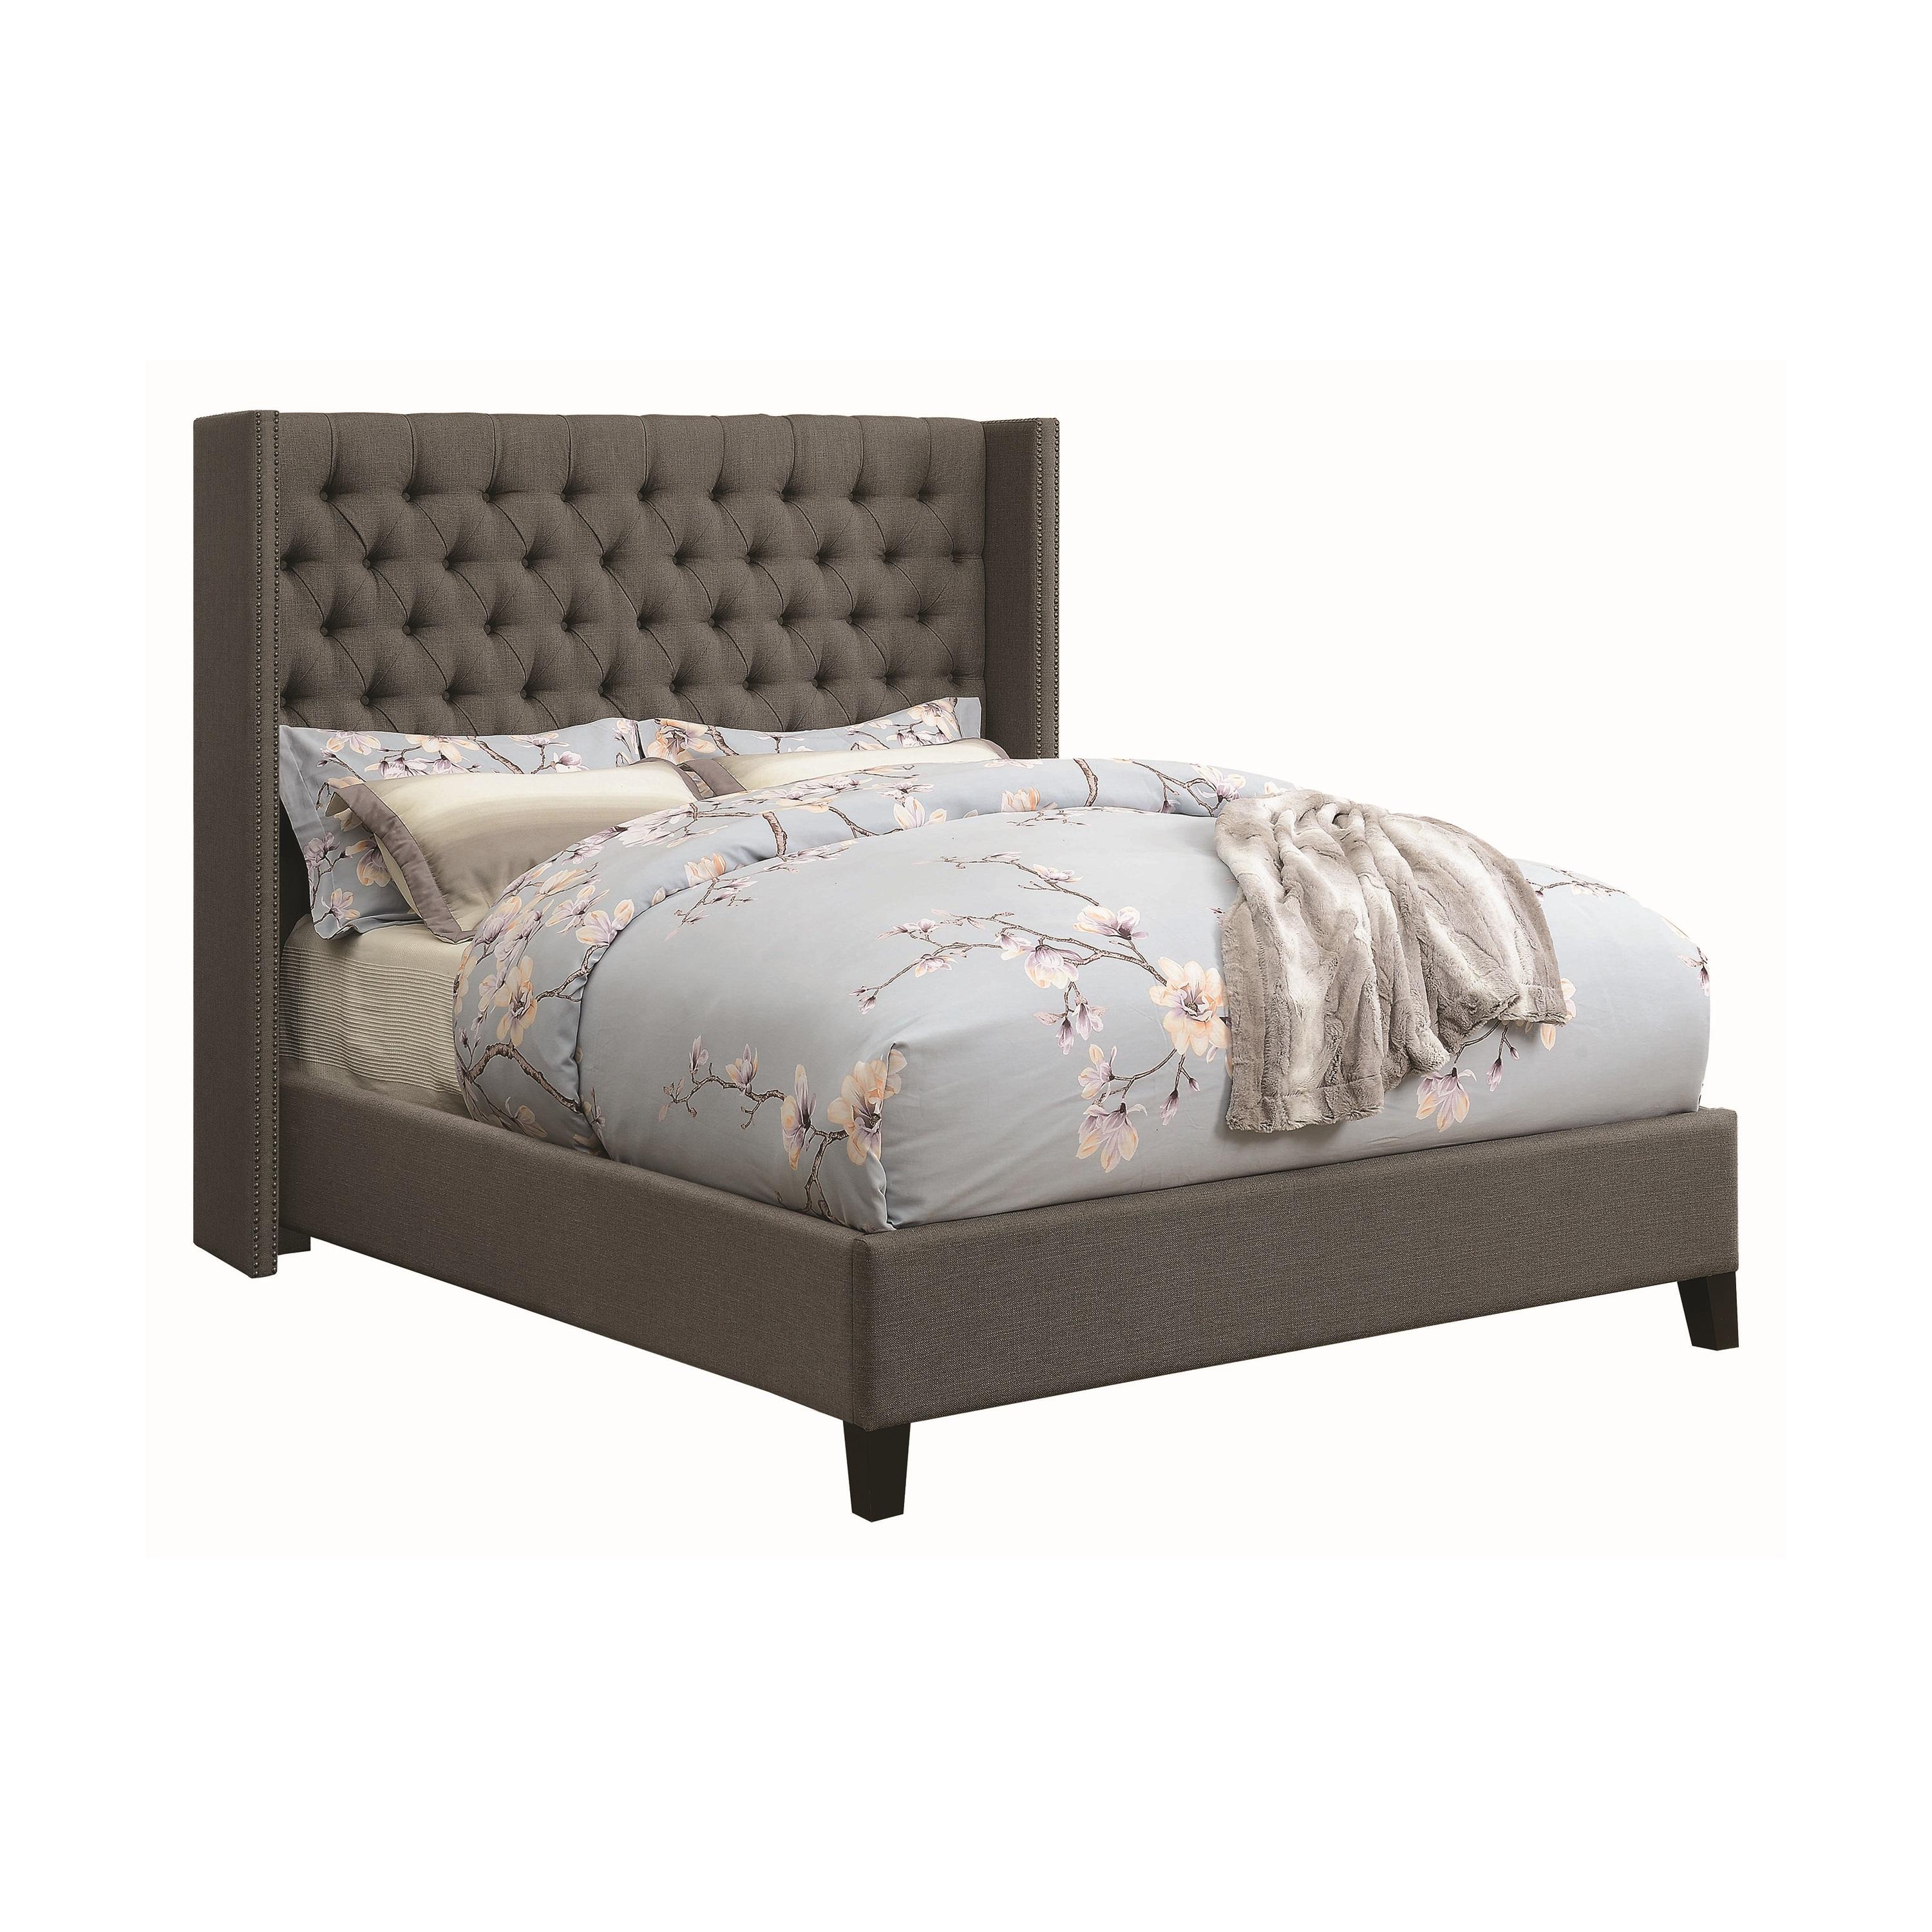 Contemporary Bed 301405Q Bancroft 301405Q in Gray Fabric